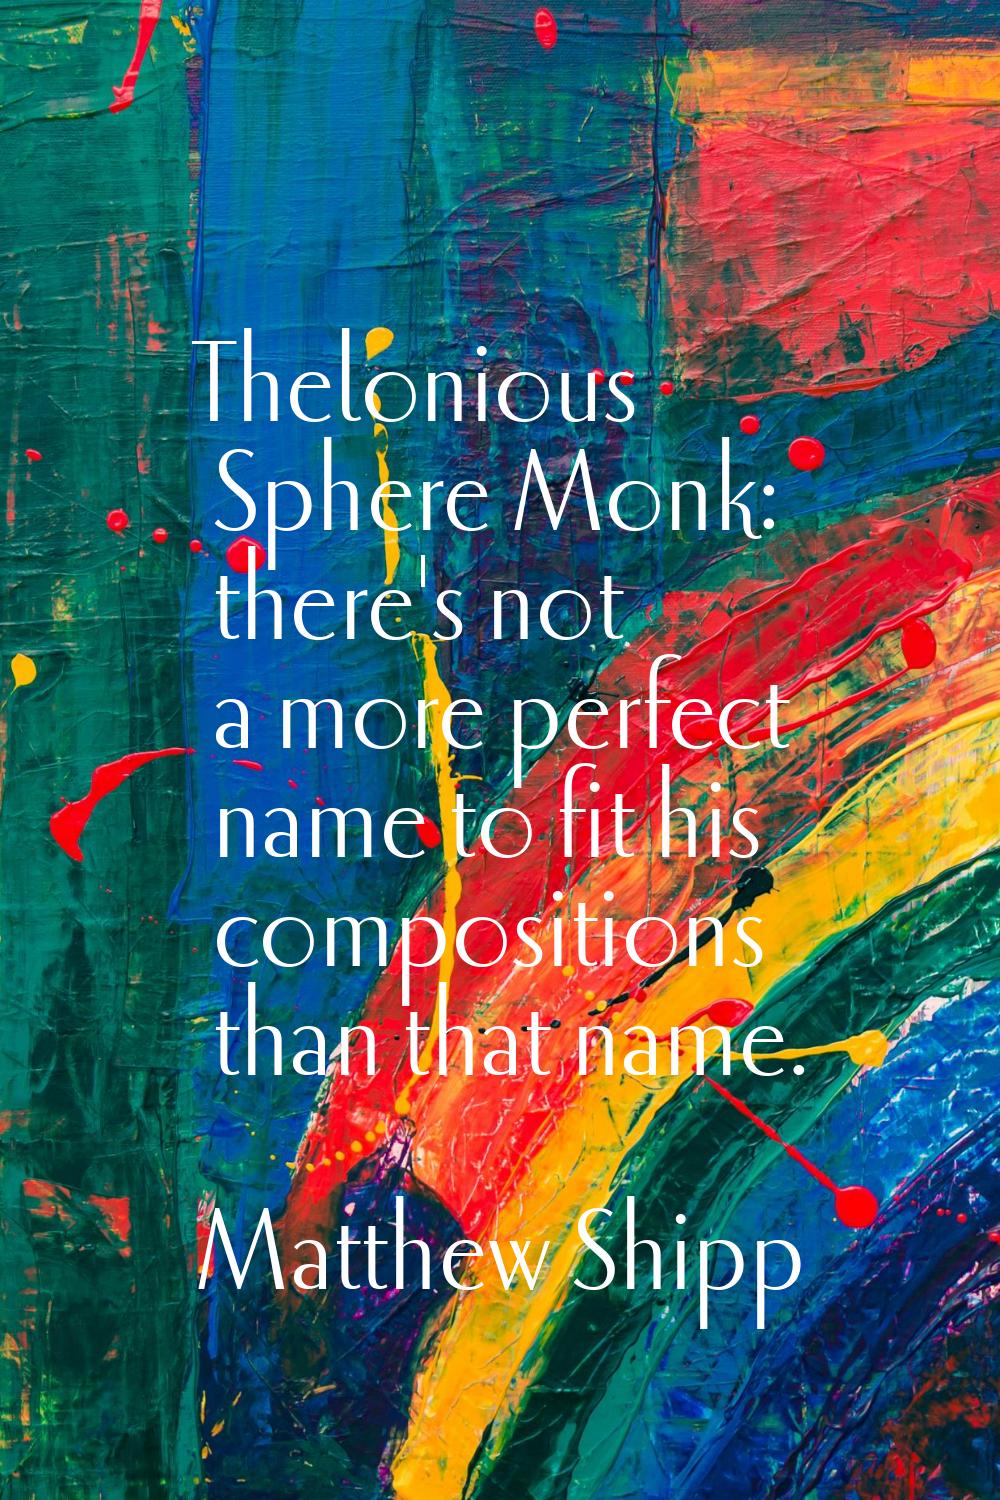 Thelonious Sphere Monk: there's not a more perfect name to fit his compositions than that name.